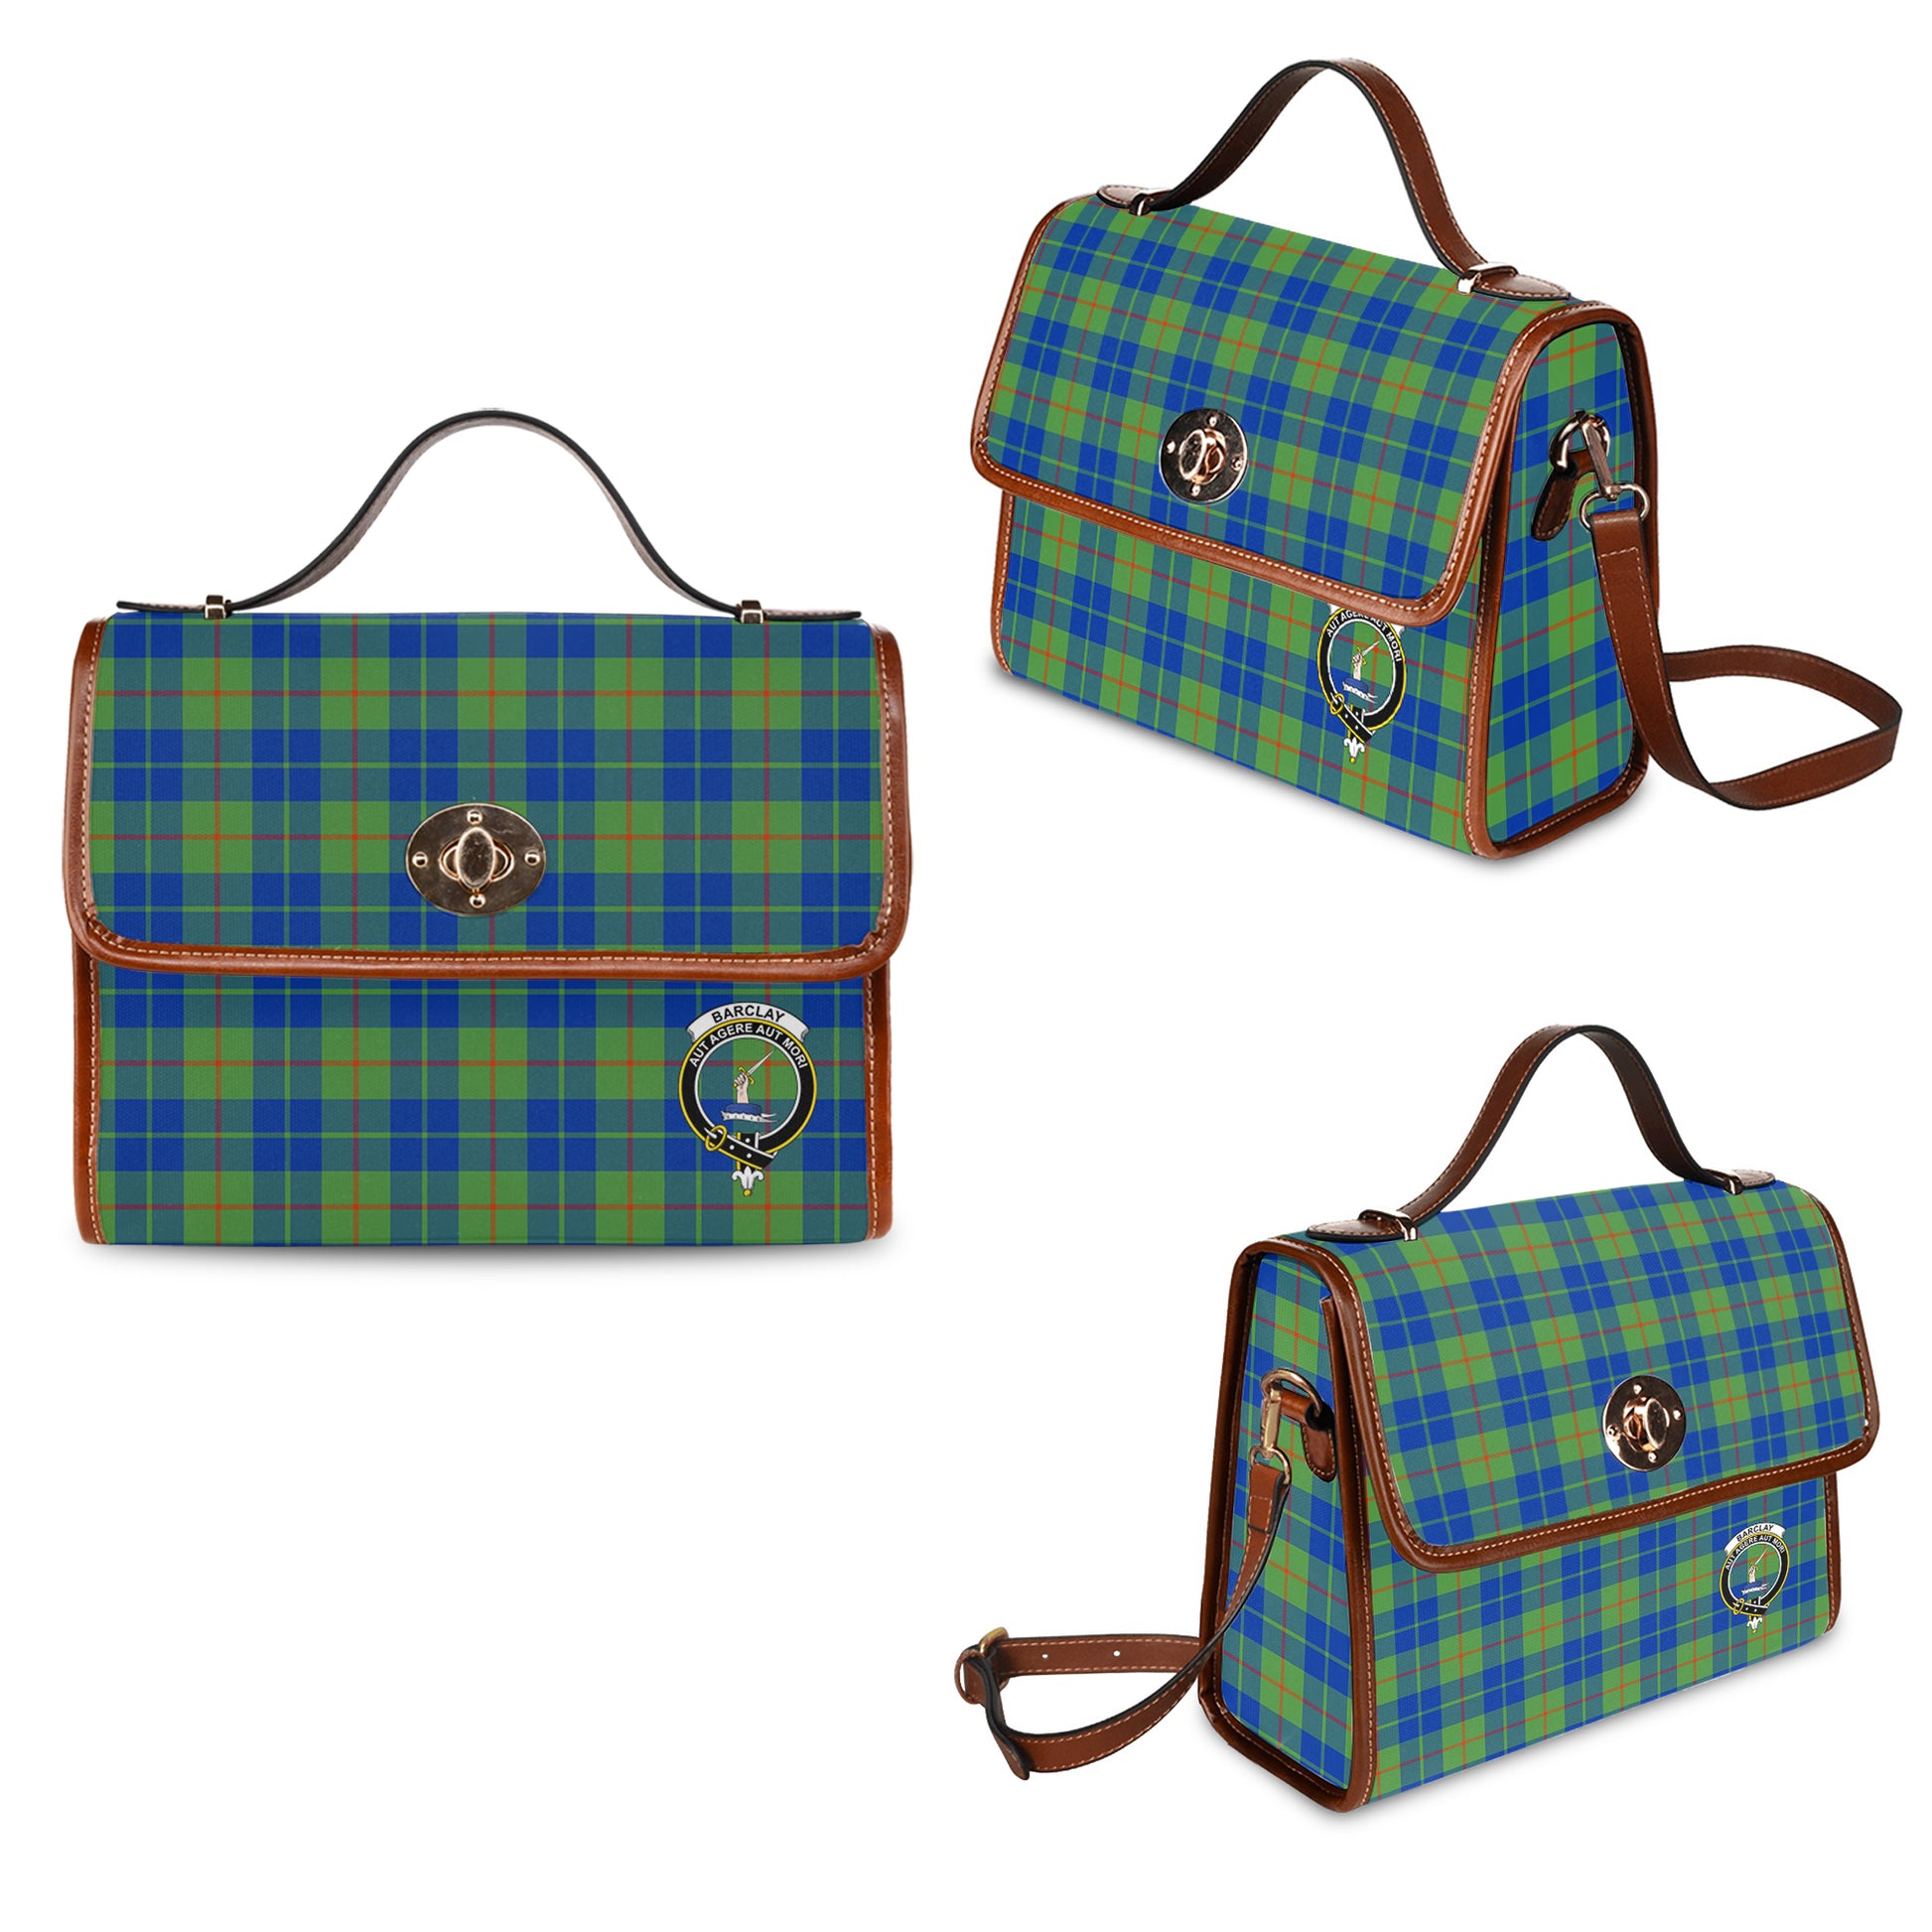 Barclay Hunting Ancient Tartan Leather Strap Waterproof Canvas Bag with Family Crest One Size 34cm * 42cm (13.4" x 16.5") - Tartanvibesclothing